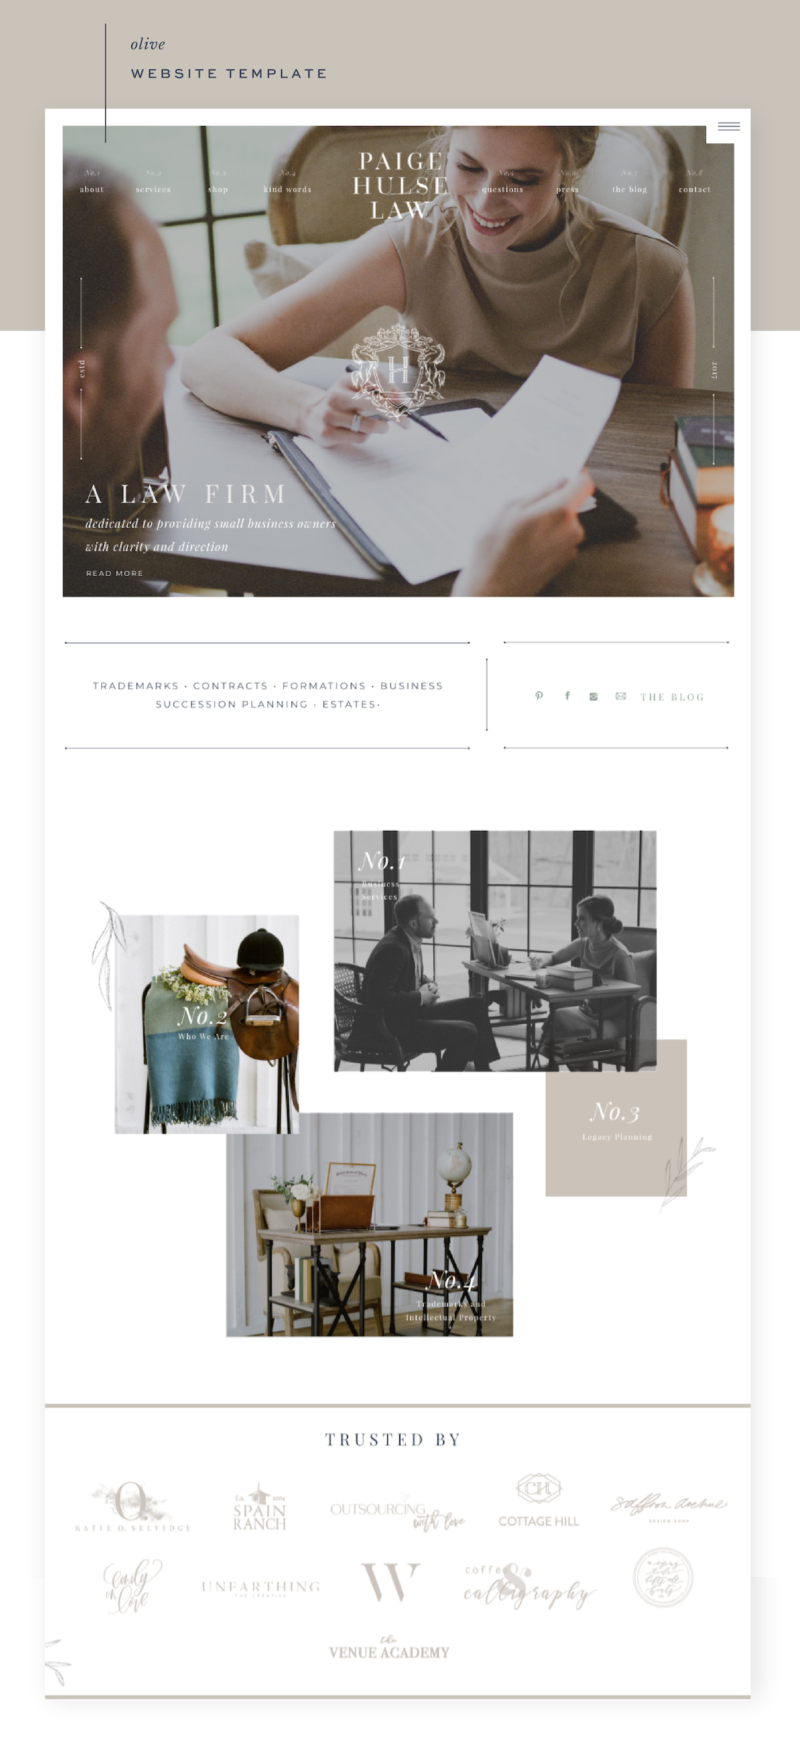 Olive Showit Template Transformation for Paige Hulse Law | Home Page Website Design